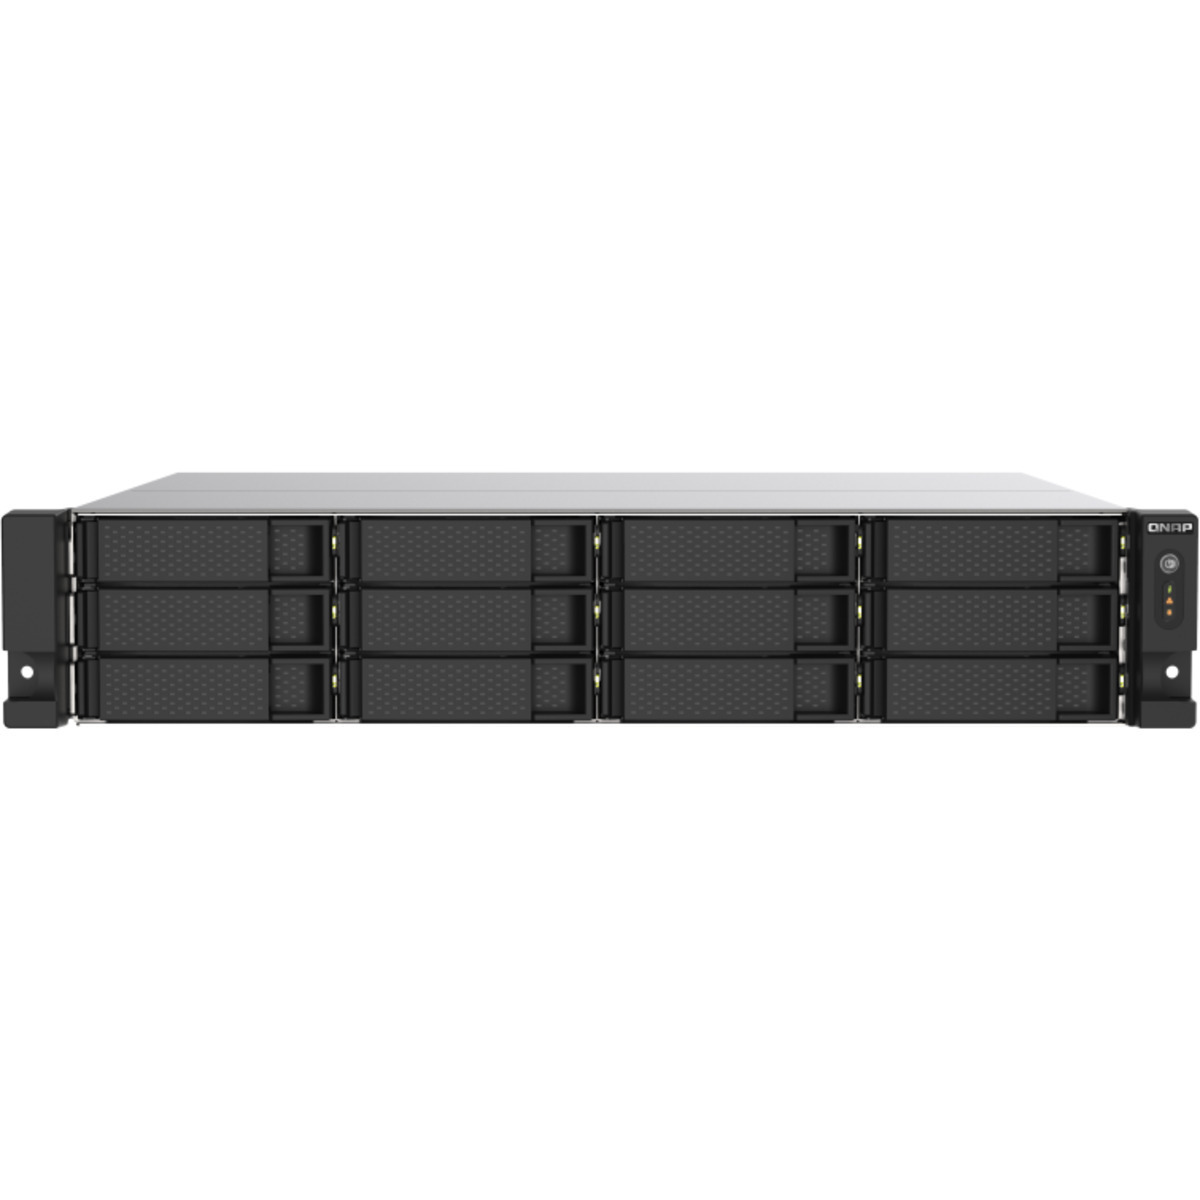 QNAP TS-1273AU-RP 160tb 12-Bay RackMount Multimedia / Power User / Business NAS - Network Attached Storage Device 10x16tb Seagate IronWolf ST16000VN001 3.5 7200rpm SATA 6Gb/s HDD NAS Class Drives Installed - Burn-In Tested - FREE RAM UPGRADE TS-1273AU-RP